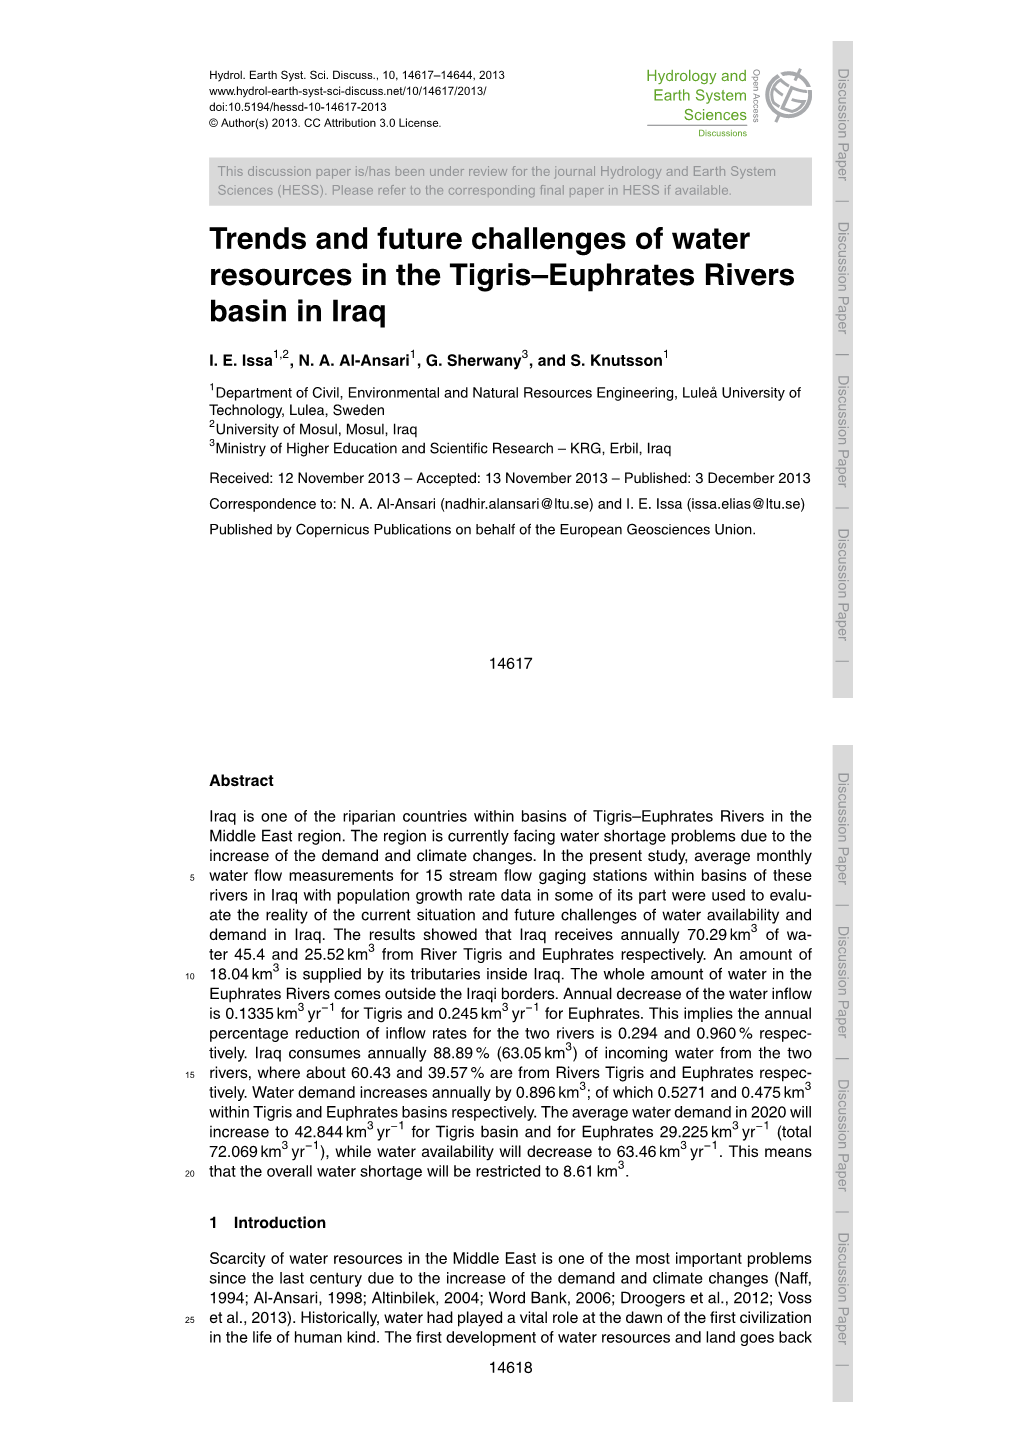 Trends and Future Challenges of Water Resources in the Tigris–Euphrates